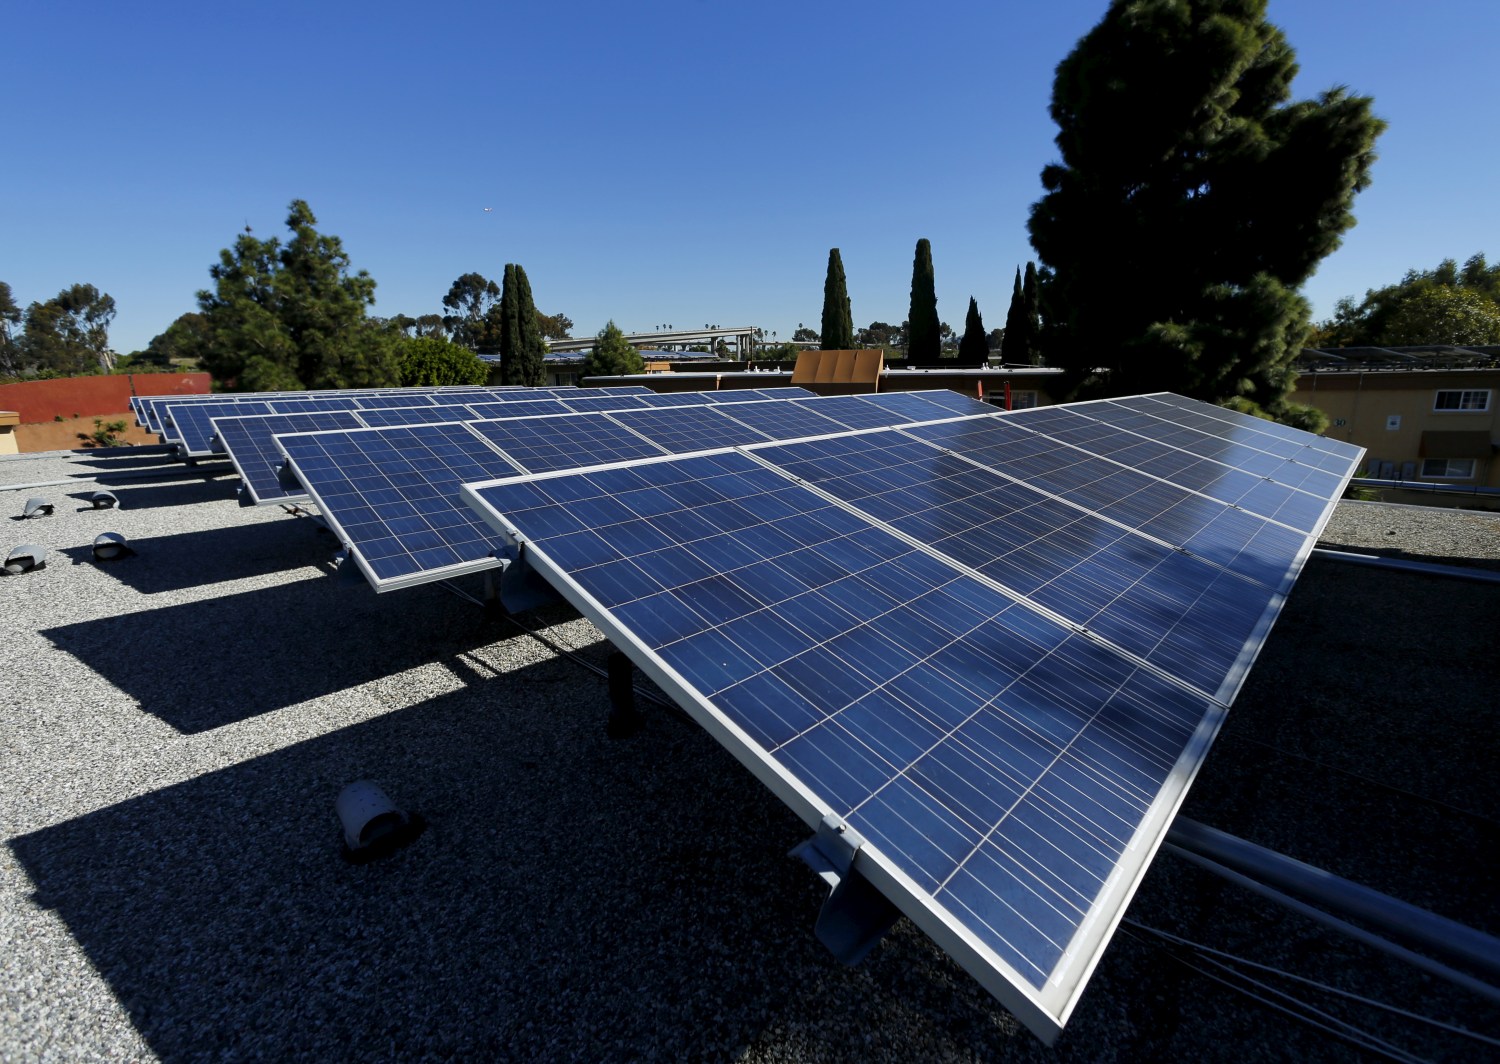 REUTERS/Mike Blake - Solar panels are shown on top of a Multifamily Affordable Solar Housing-funded (MASH) housing complex in National City, California, U.S. on November 19, 2015.